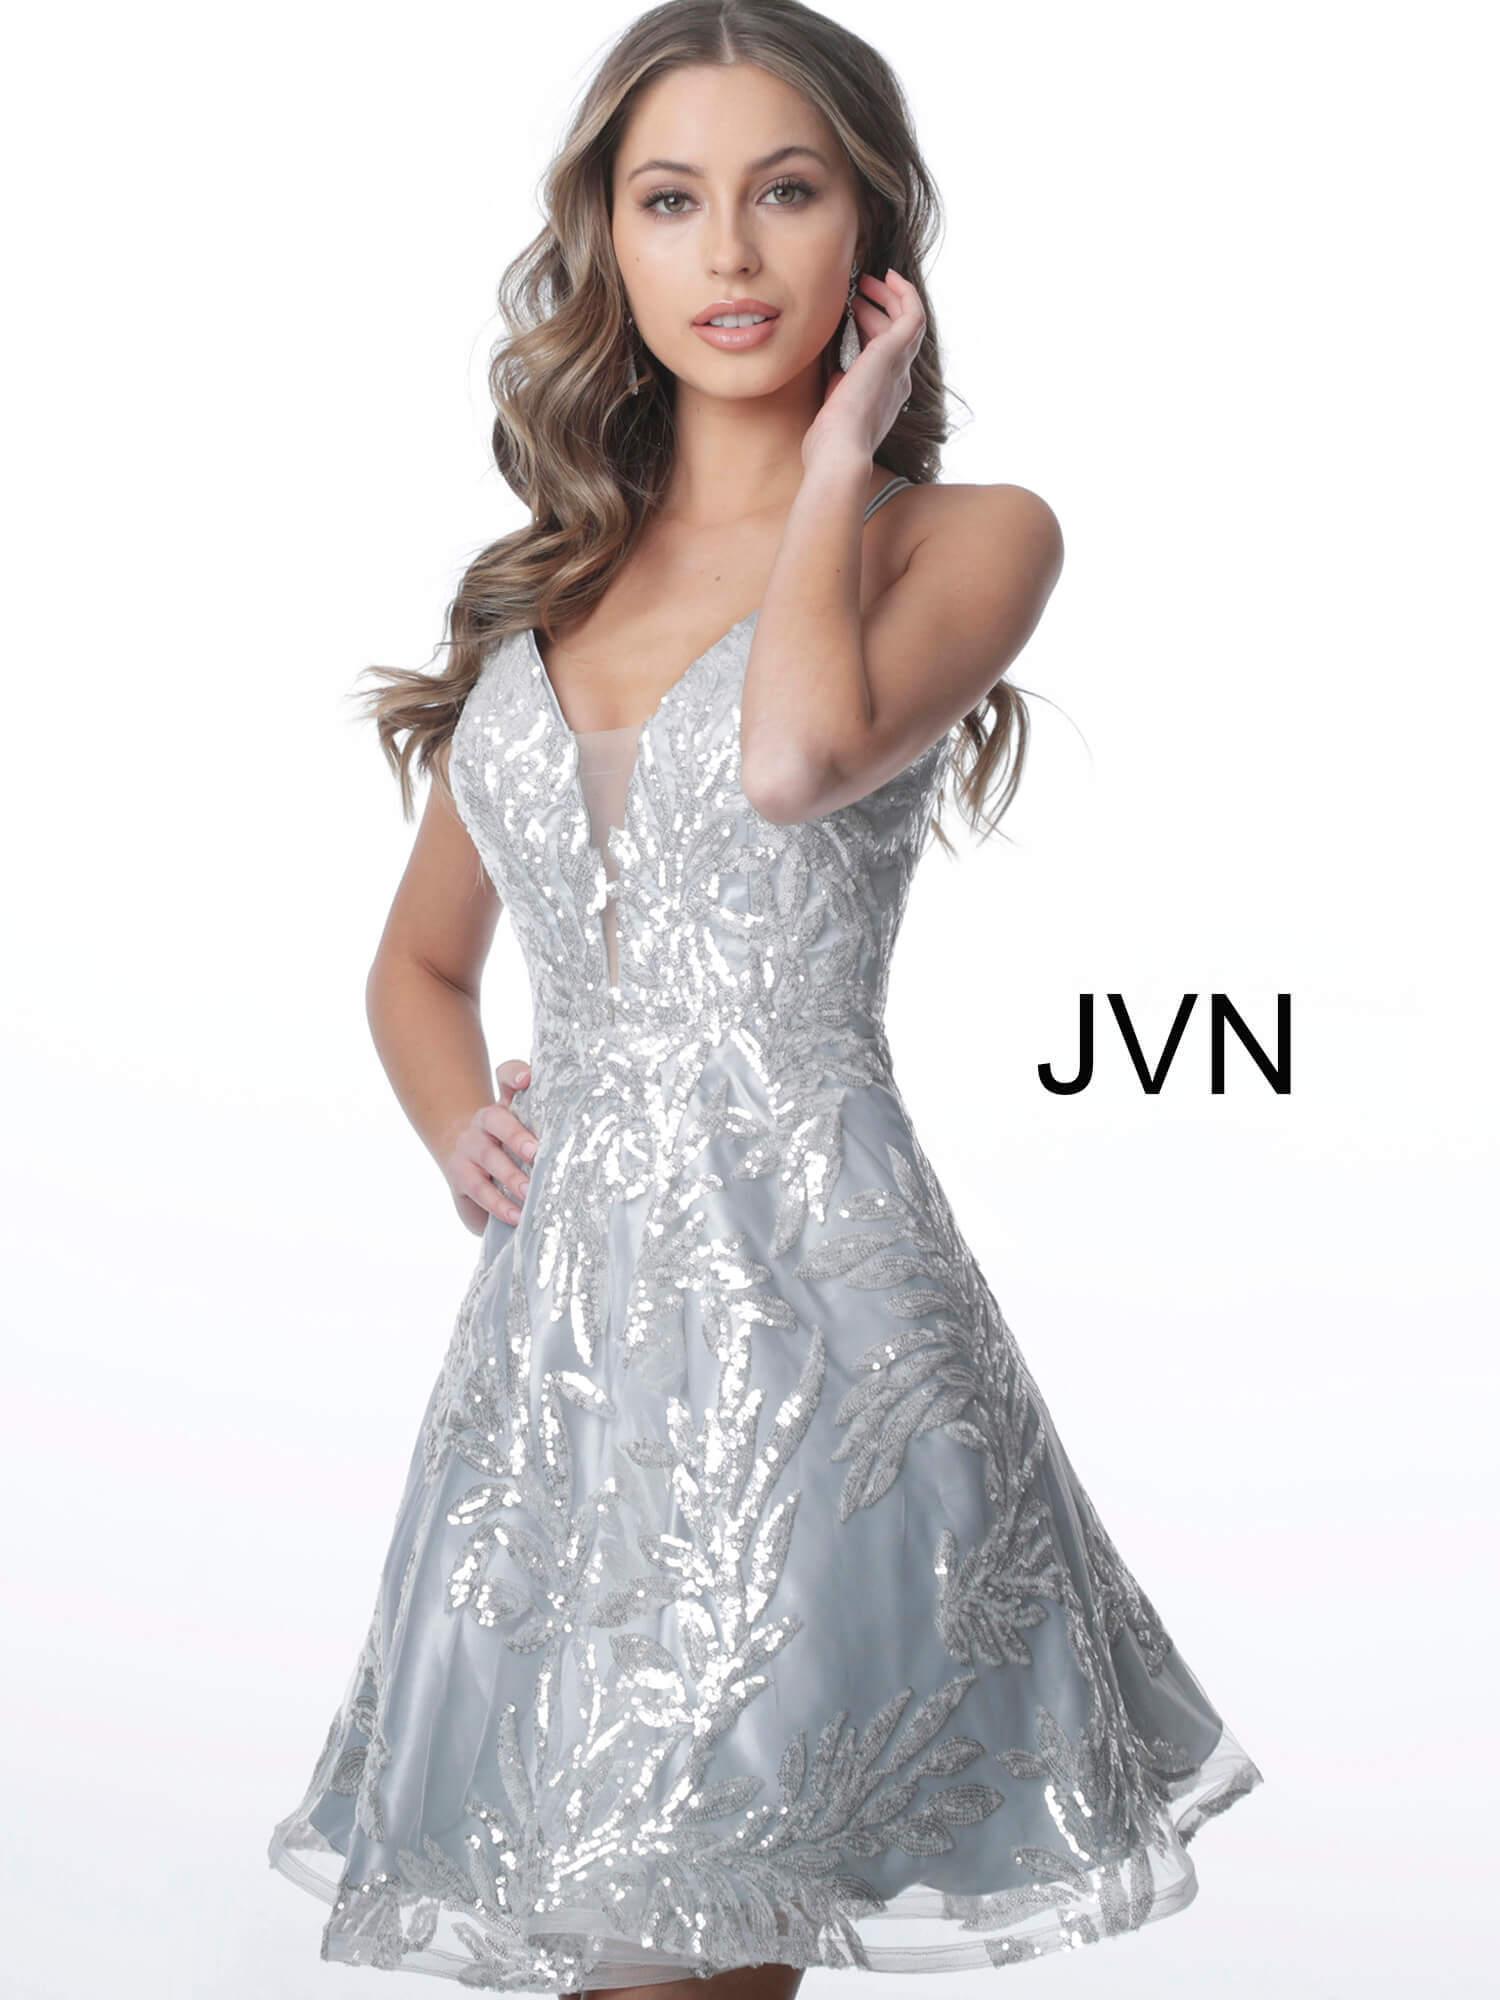 JVN2451 Dress | Silver short fit and flare sequin cocktail dress